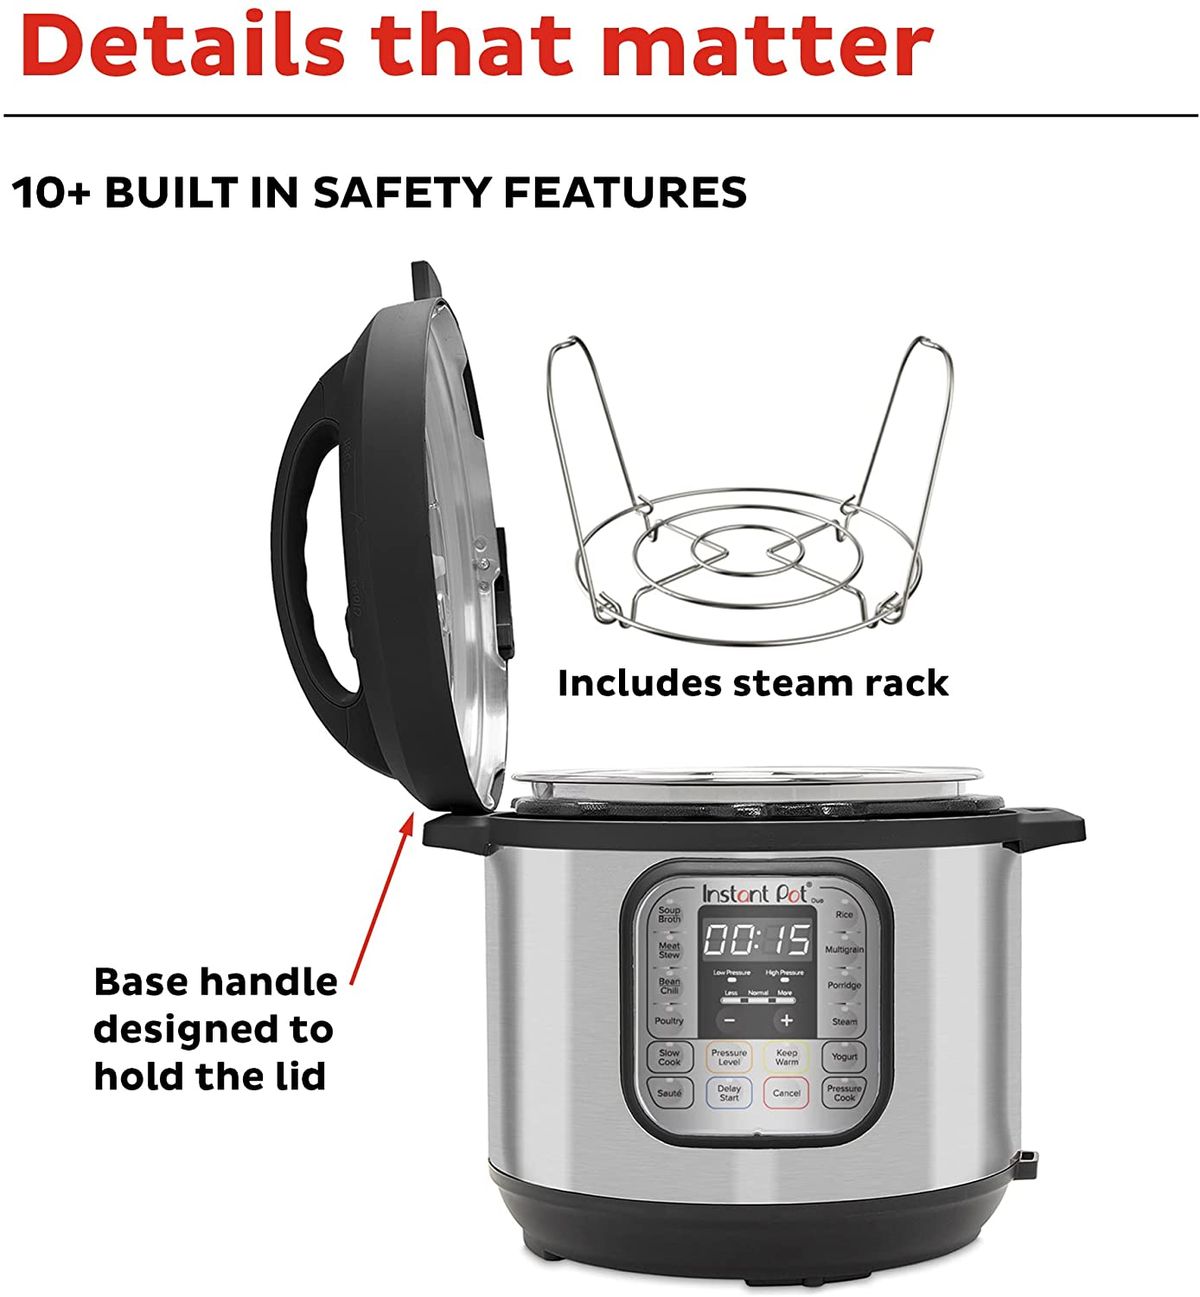 Instant Pot DUO80 7-In-1 Multi-Functional Electric Pressure Cooker, 8 qt